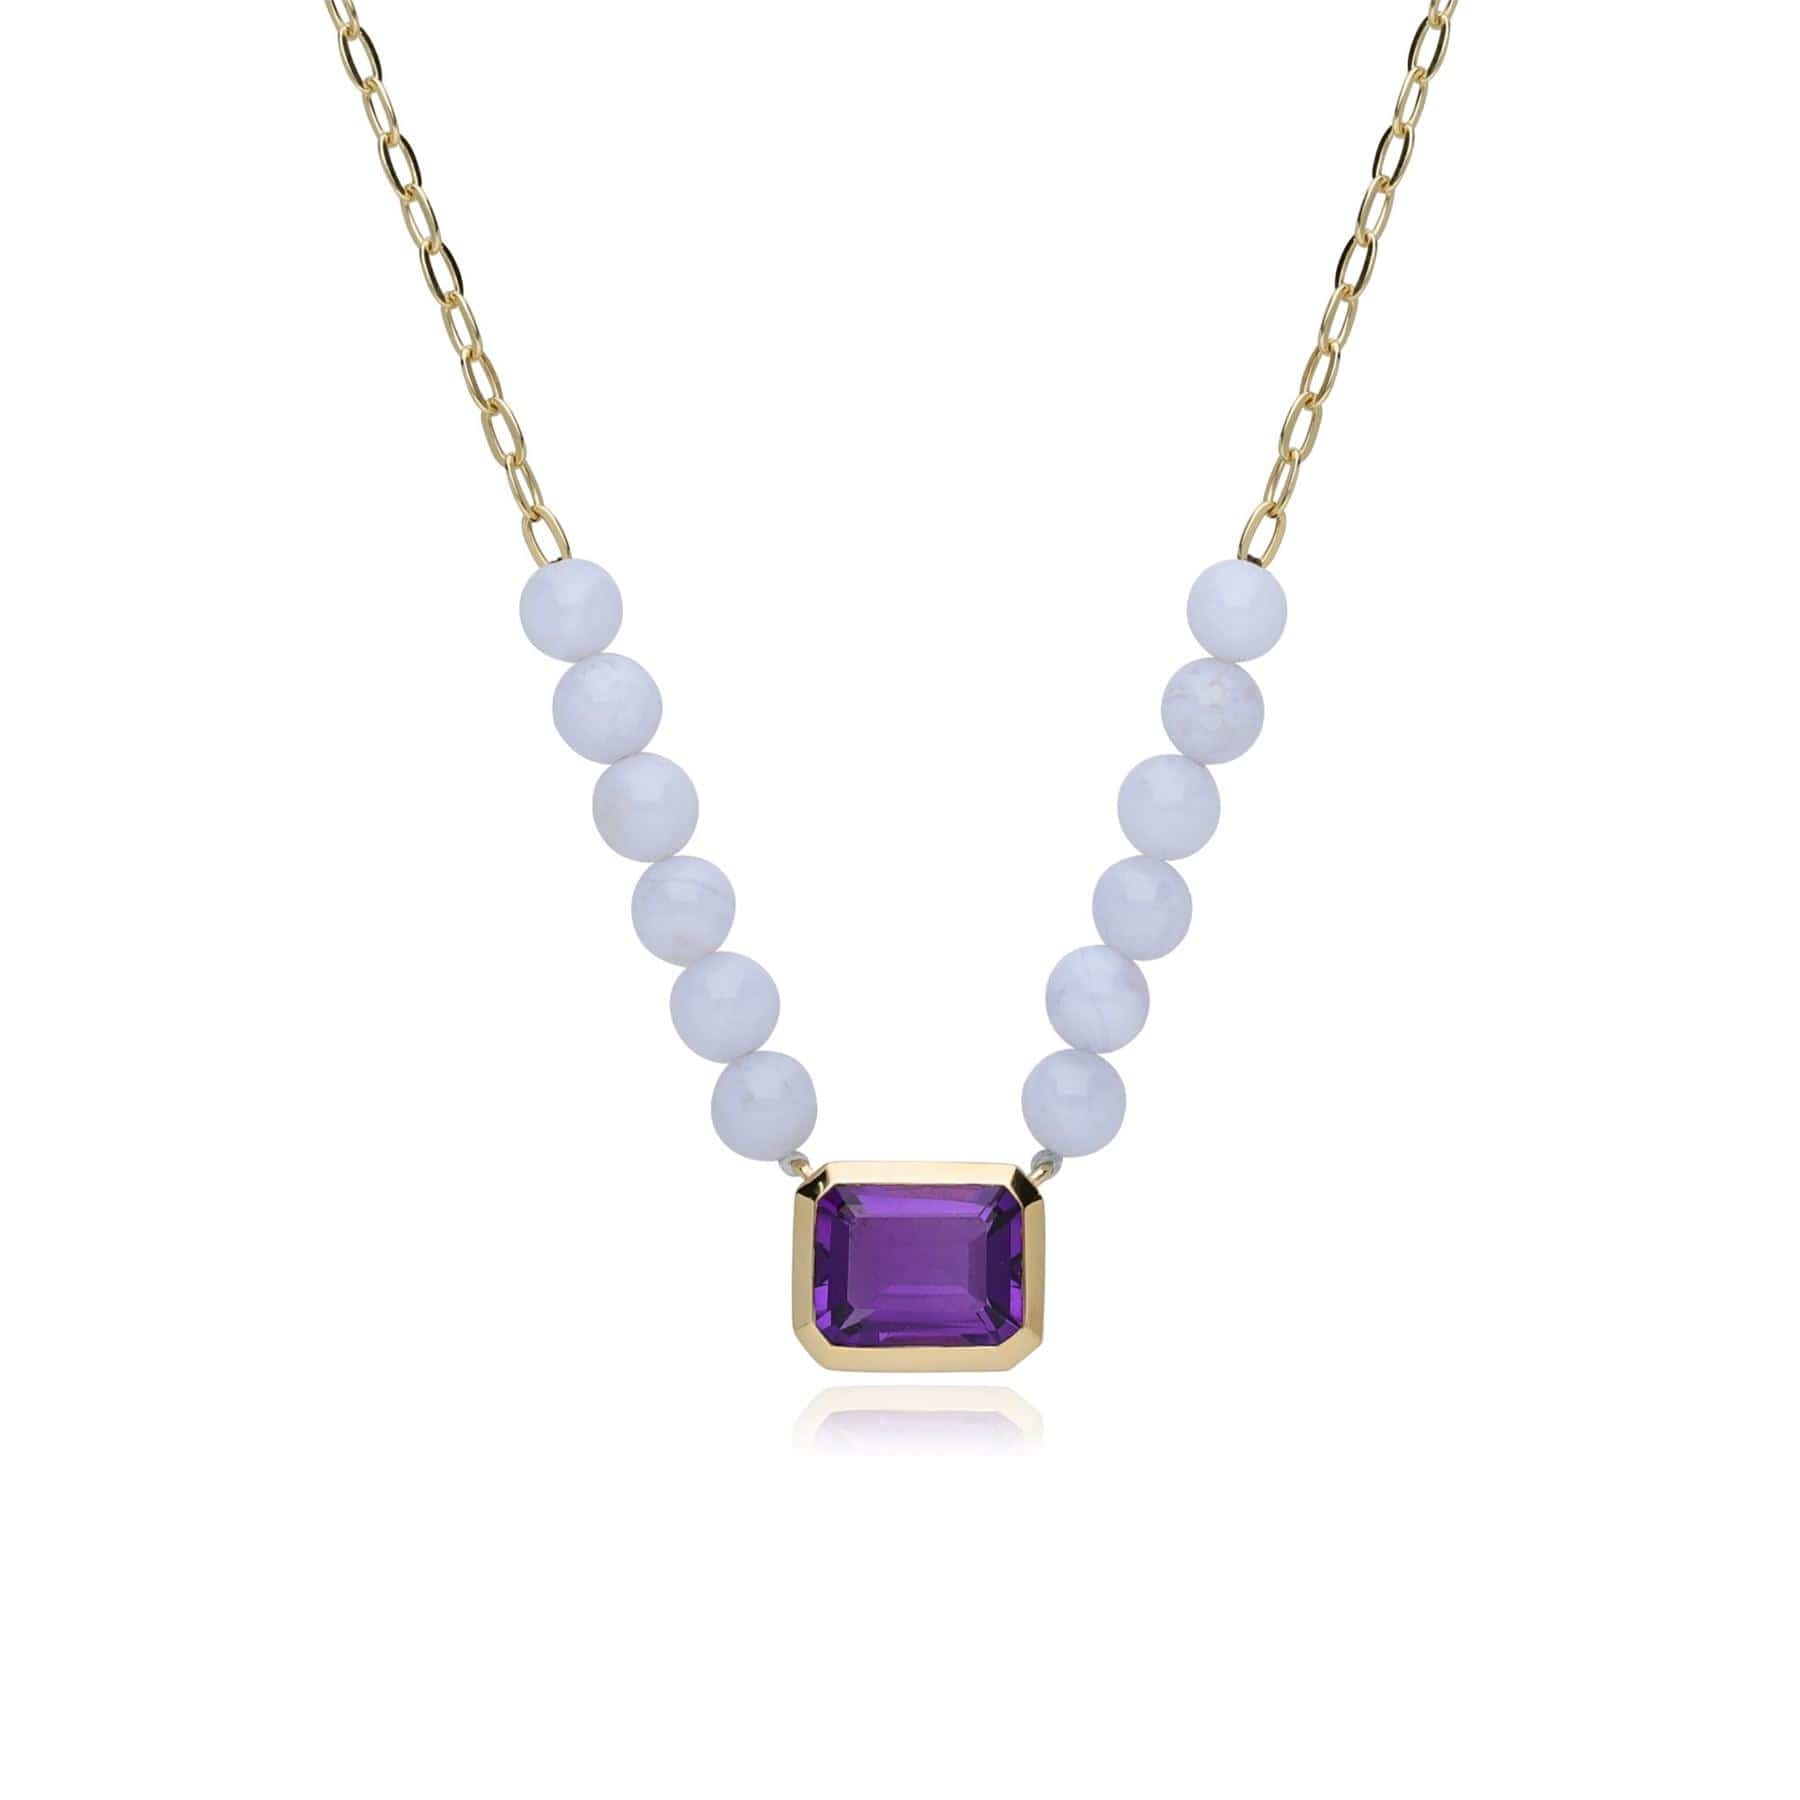 Gemondo ECFEW™ 'The Unifier' Amethyst & Blue Lace Agate Beads  Necklace